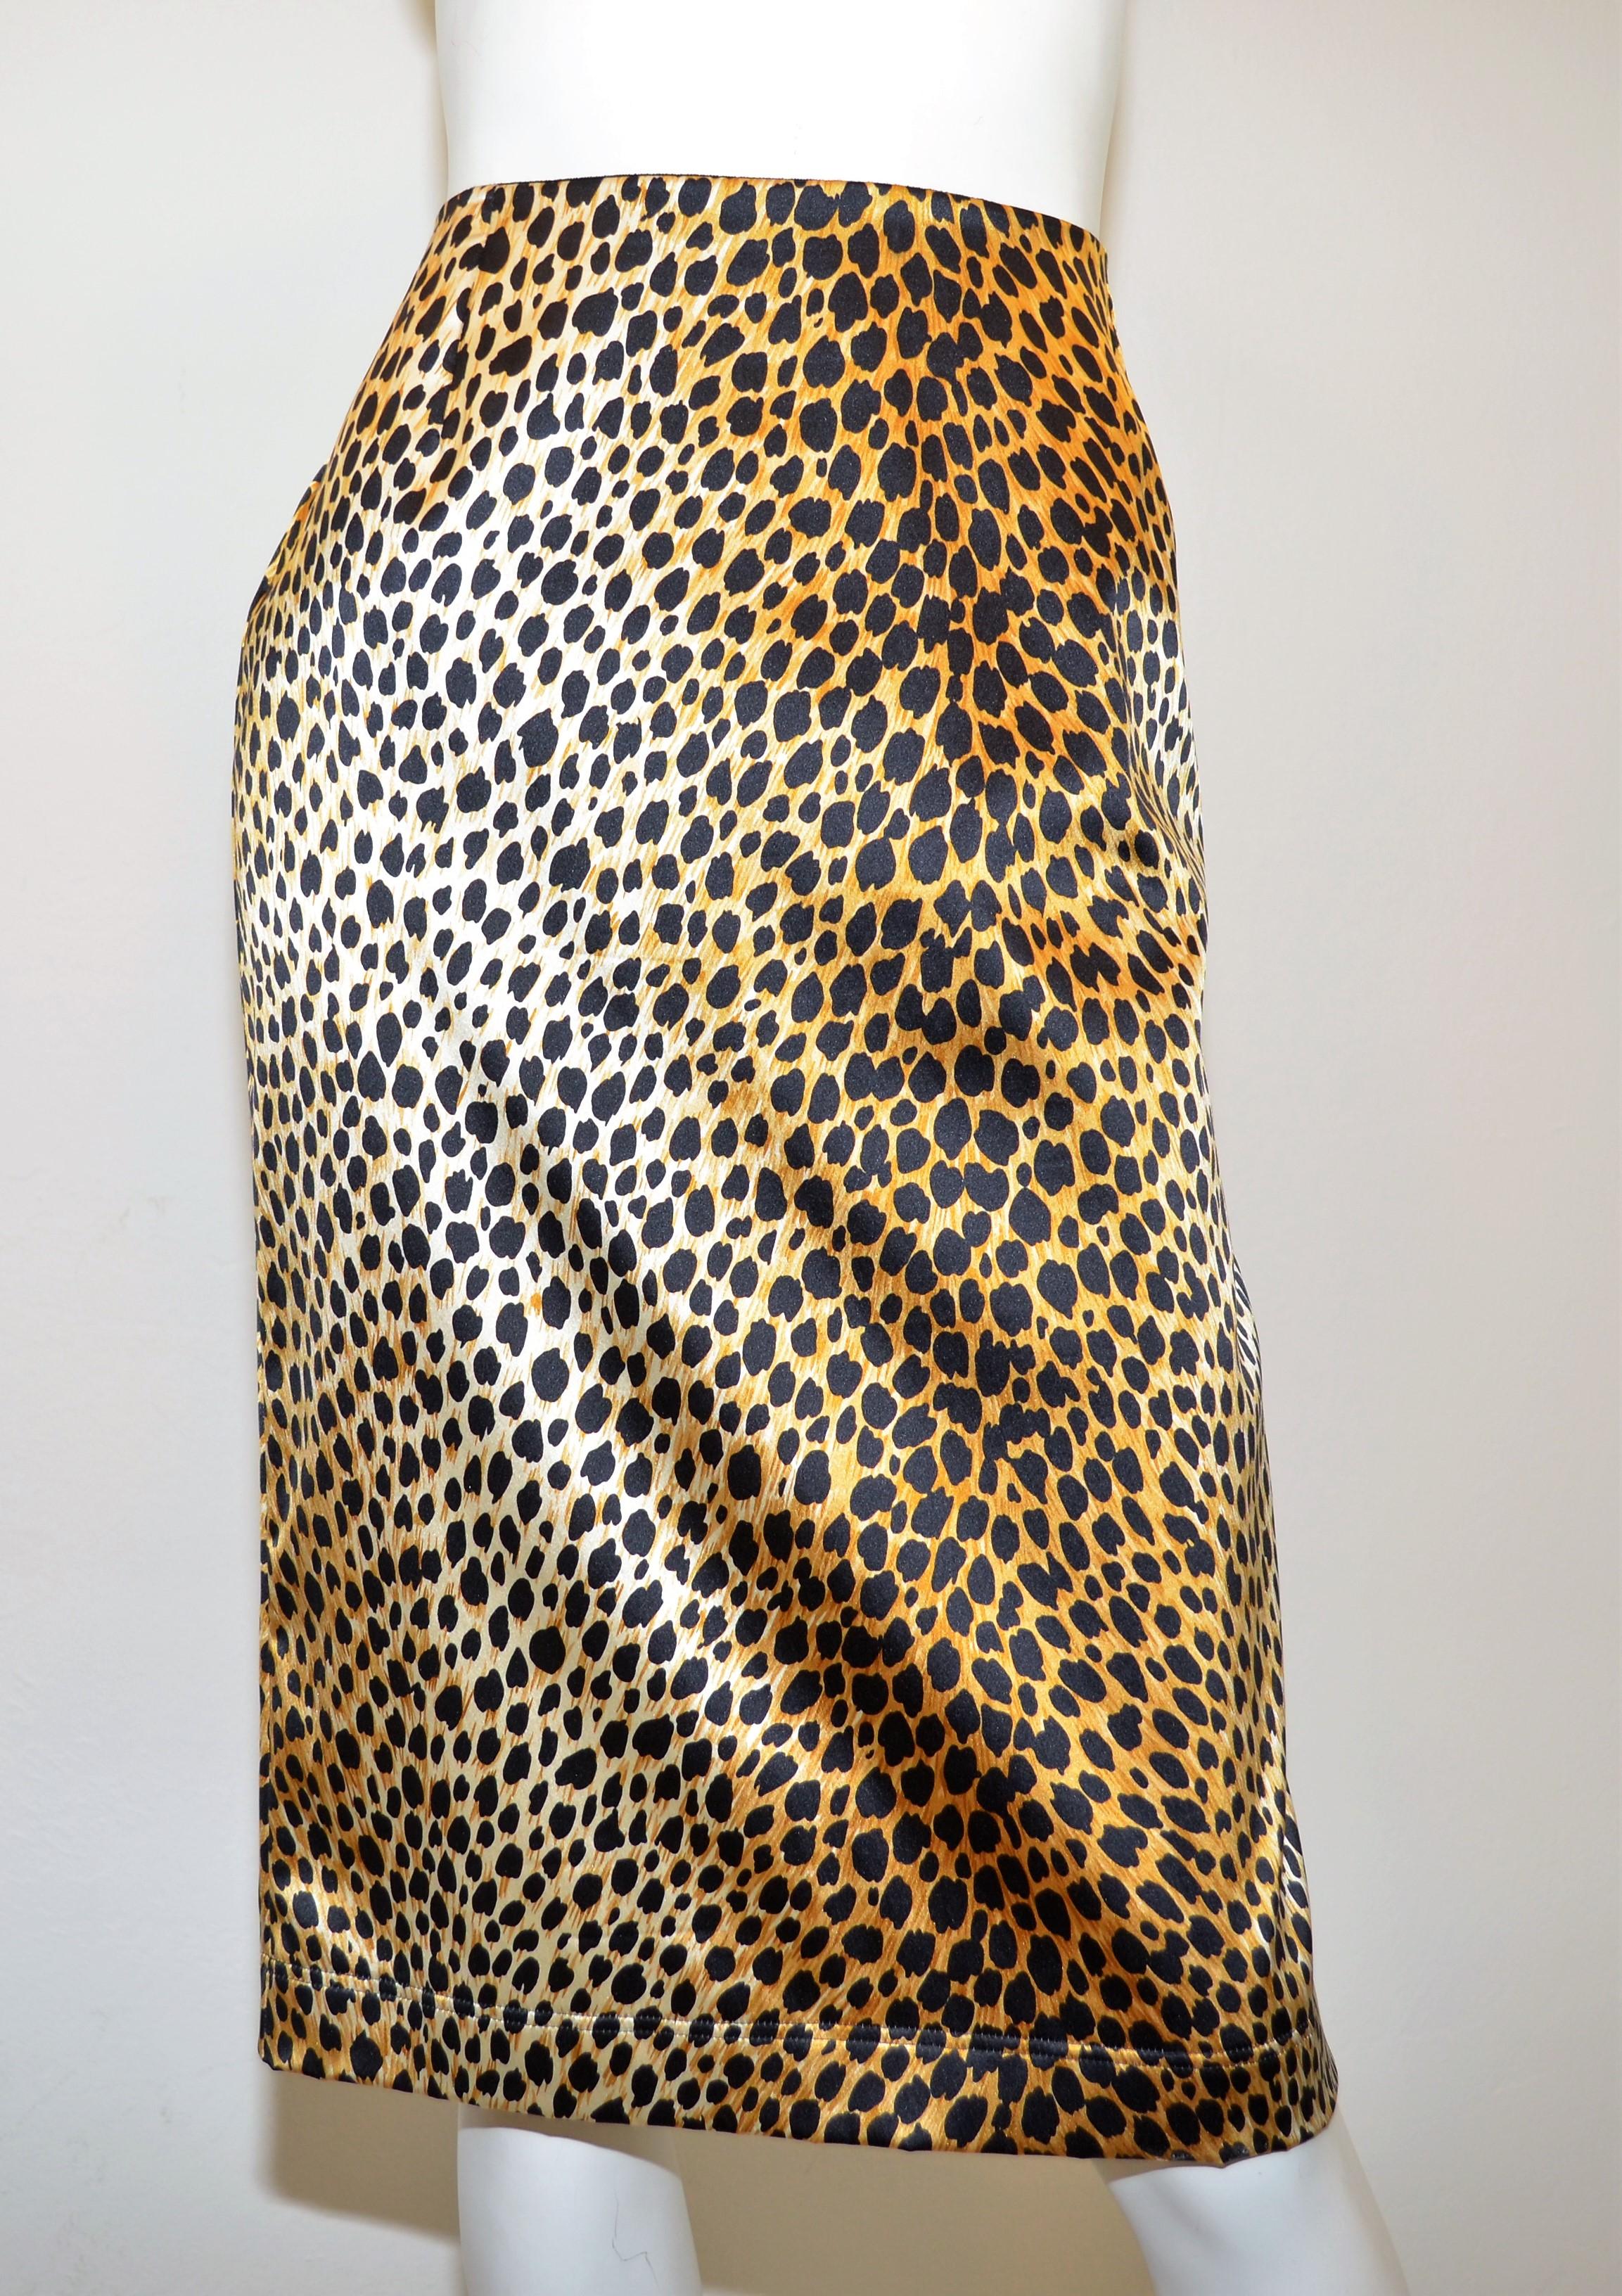 Dolce & Gabbana satin skirt features a leopard print throughout with a zipper fastening. Skirt is in excellent condition. Size 44, made in Italy, composed with a silk blend.

Waist 30''
Hips 40''
Length 26''